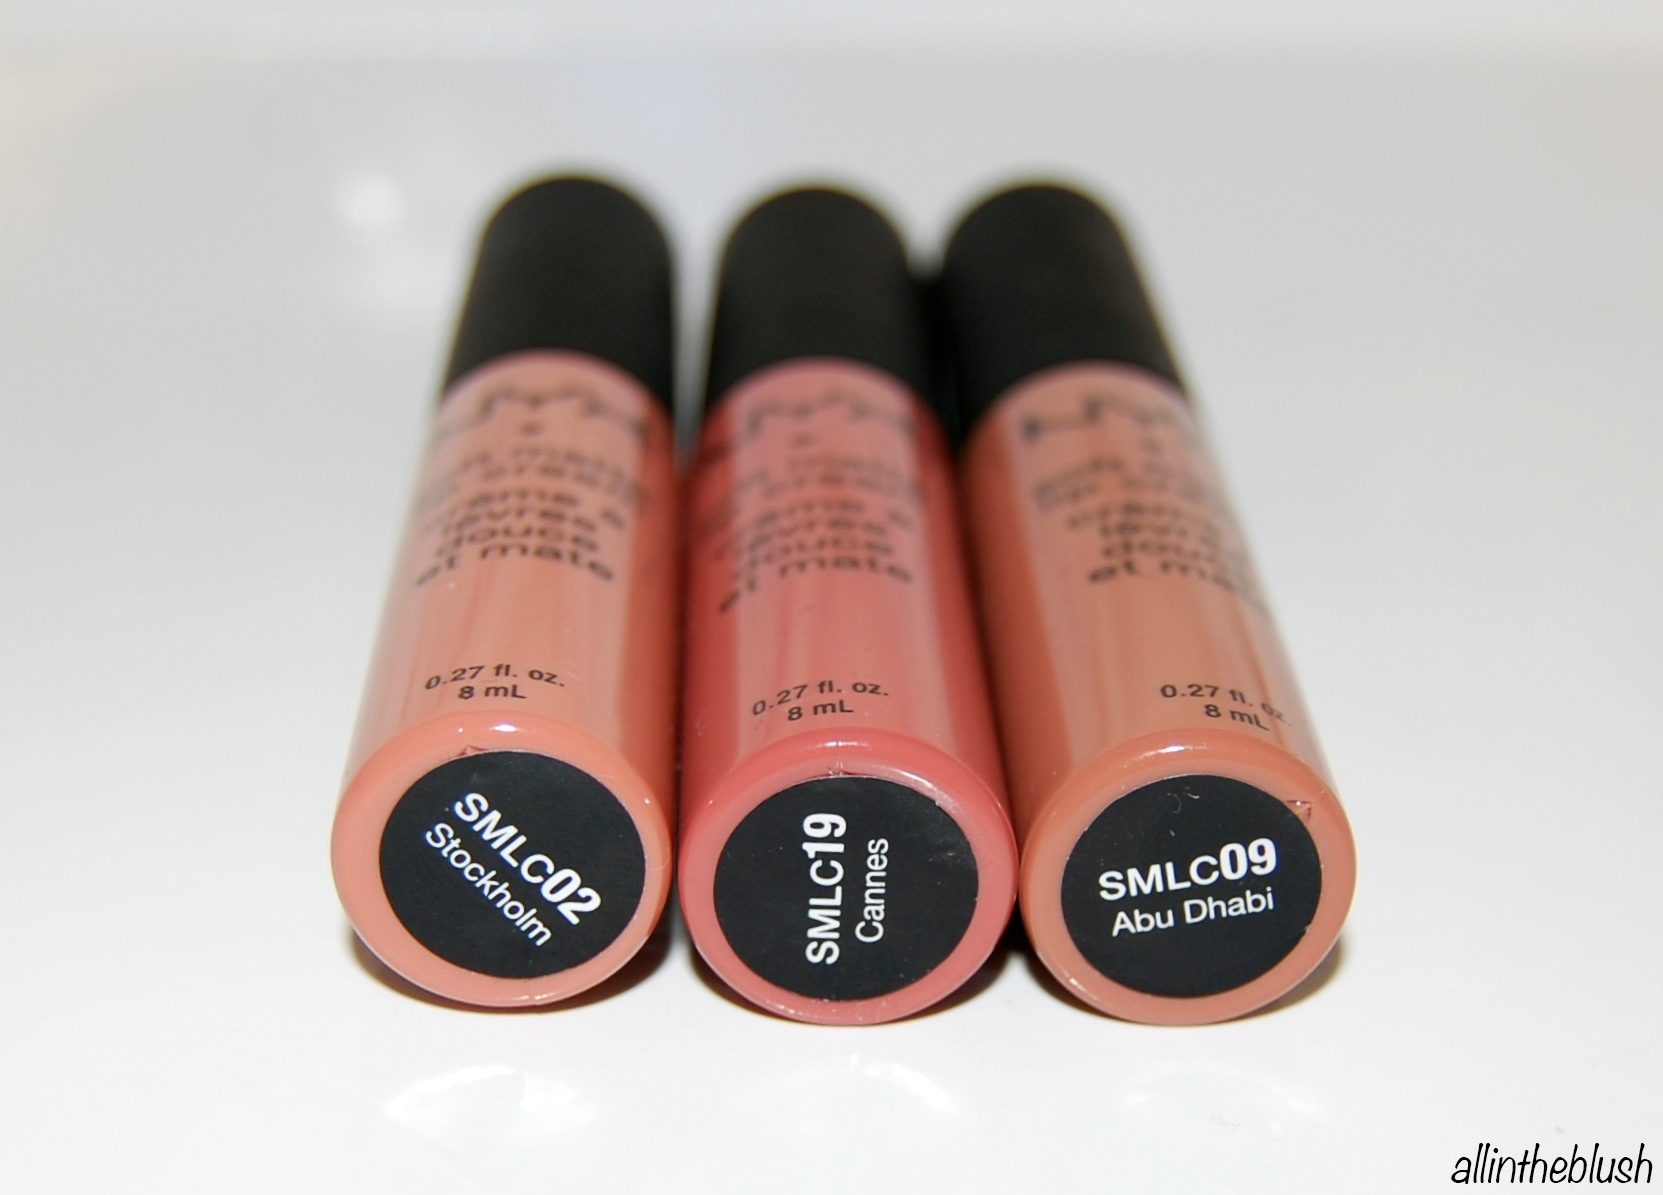 NYX Cosmetics Soft Matte Creams - Review & Swatches - All In The Blush